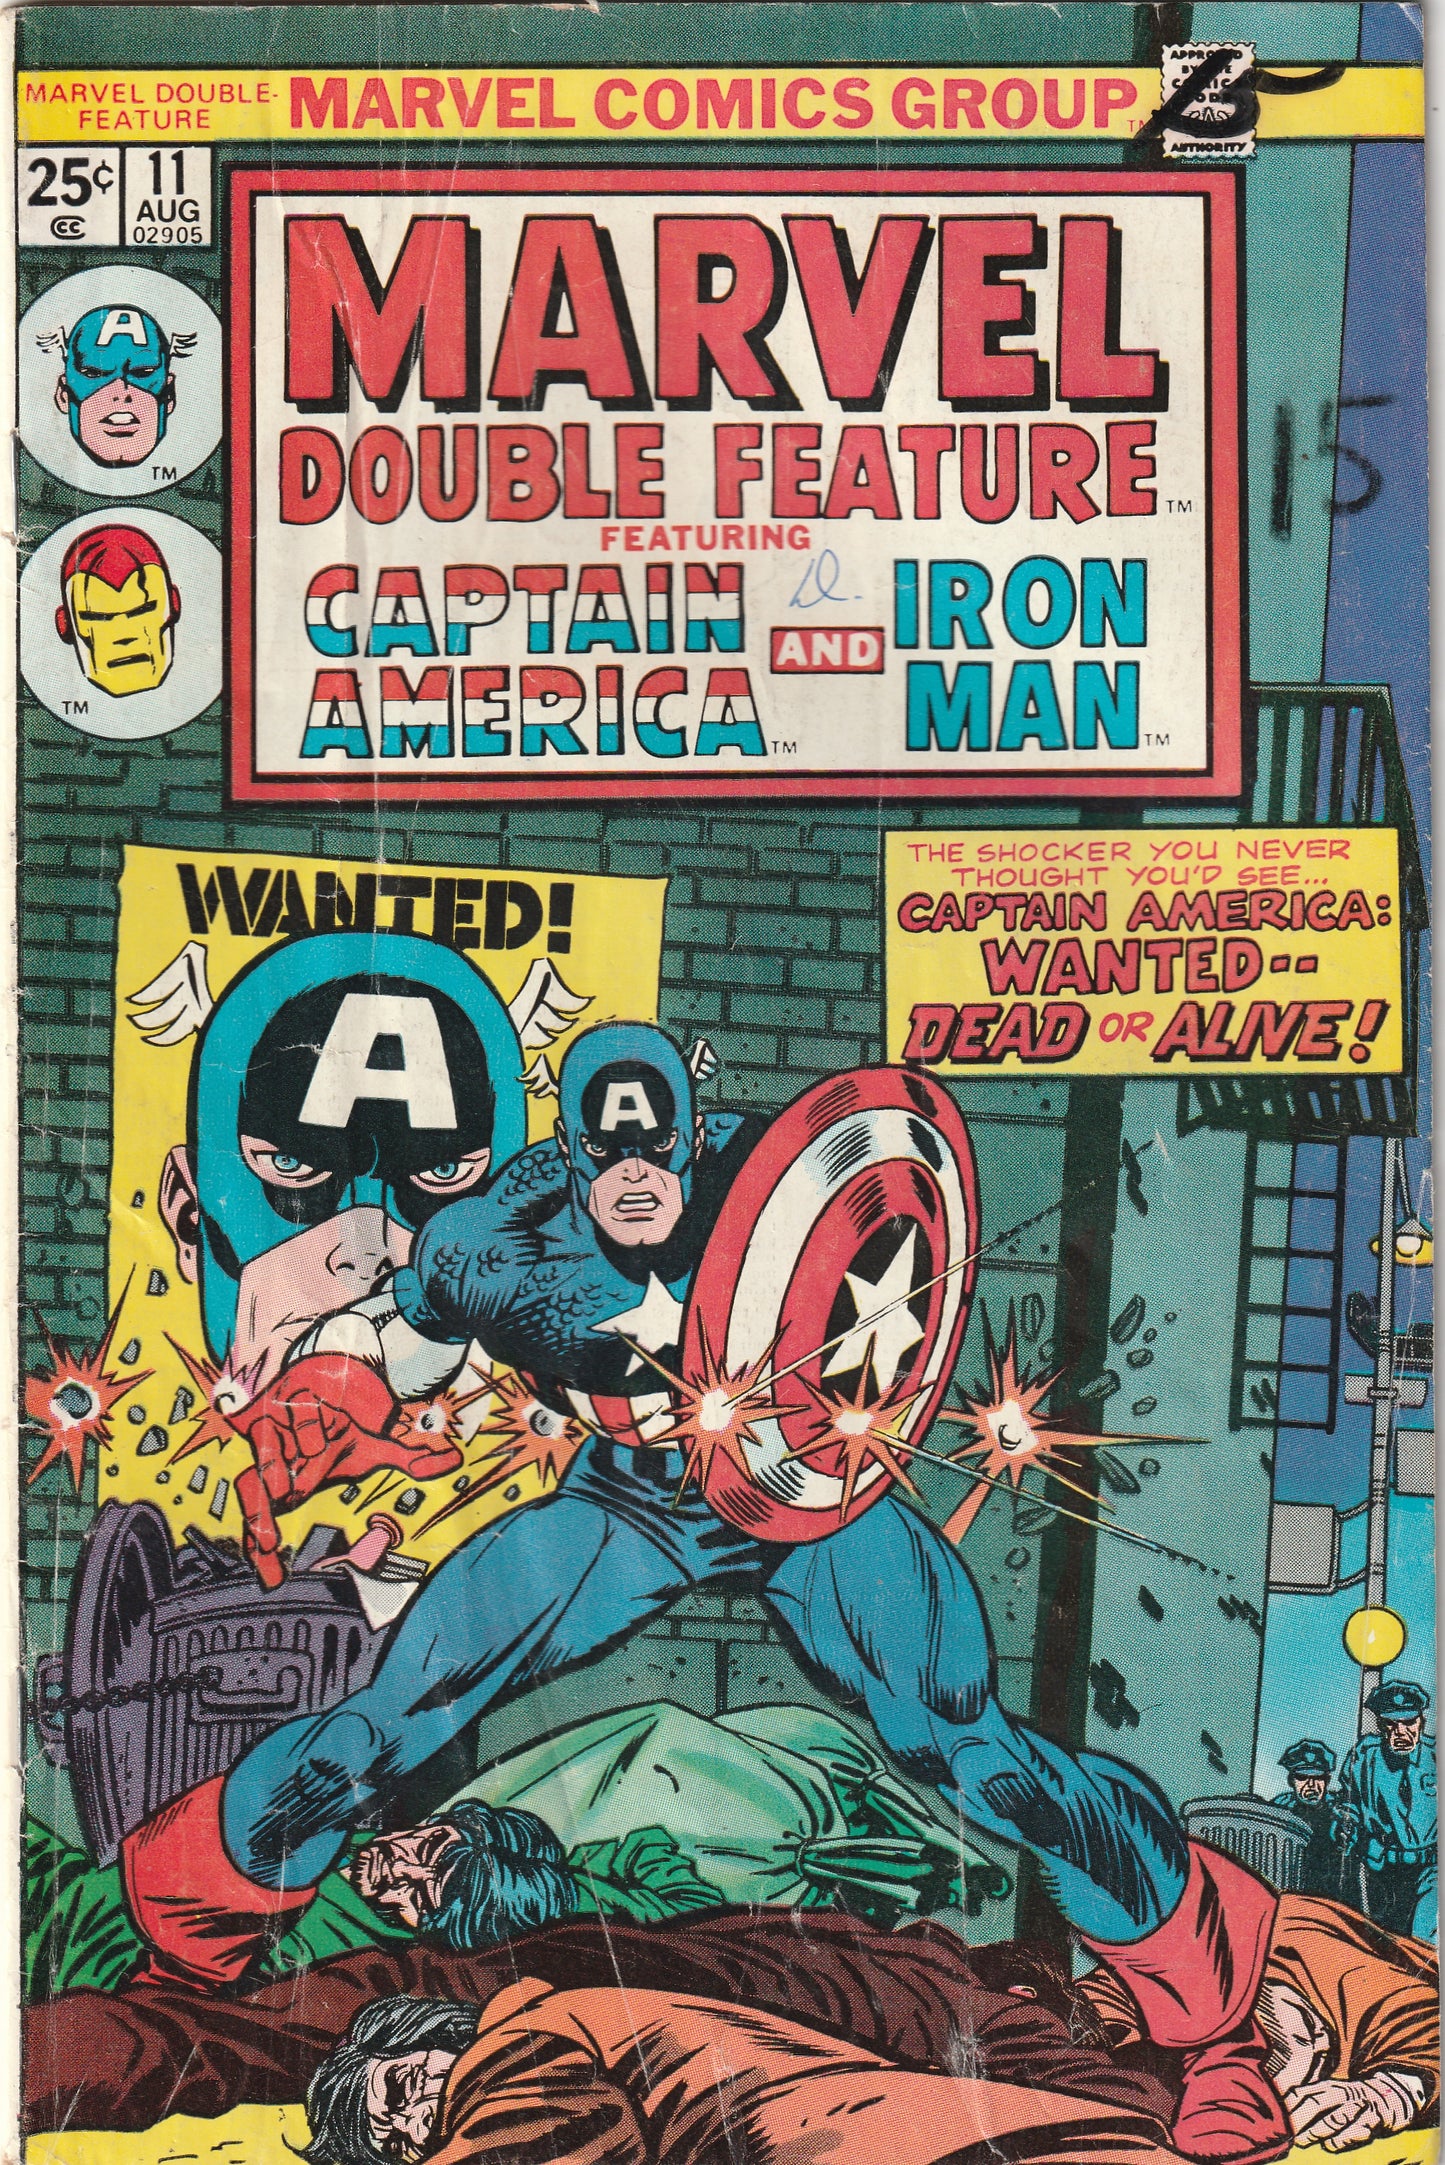 Marvel Double Feature #11 (1975) Featuring Captain America and Iron Man